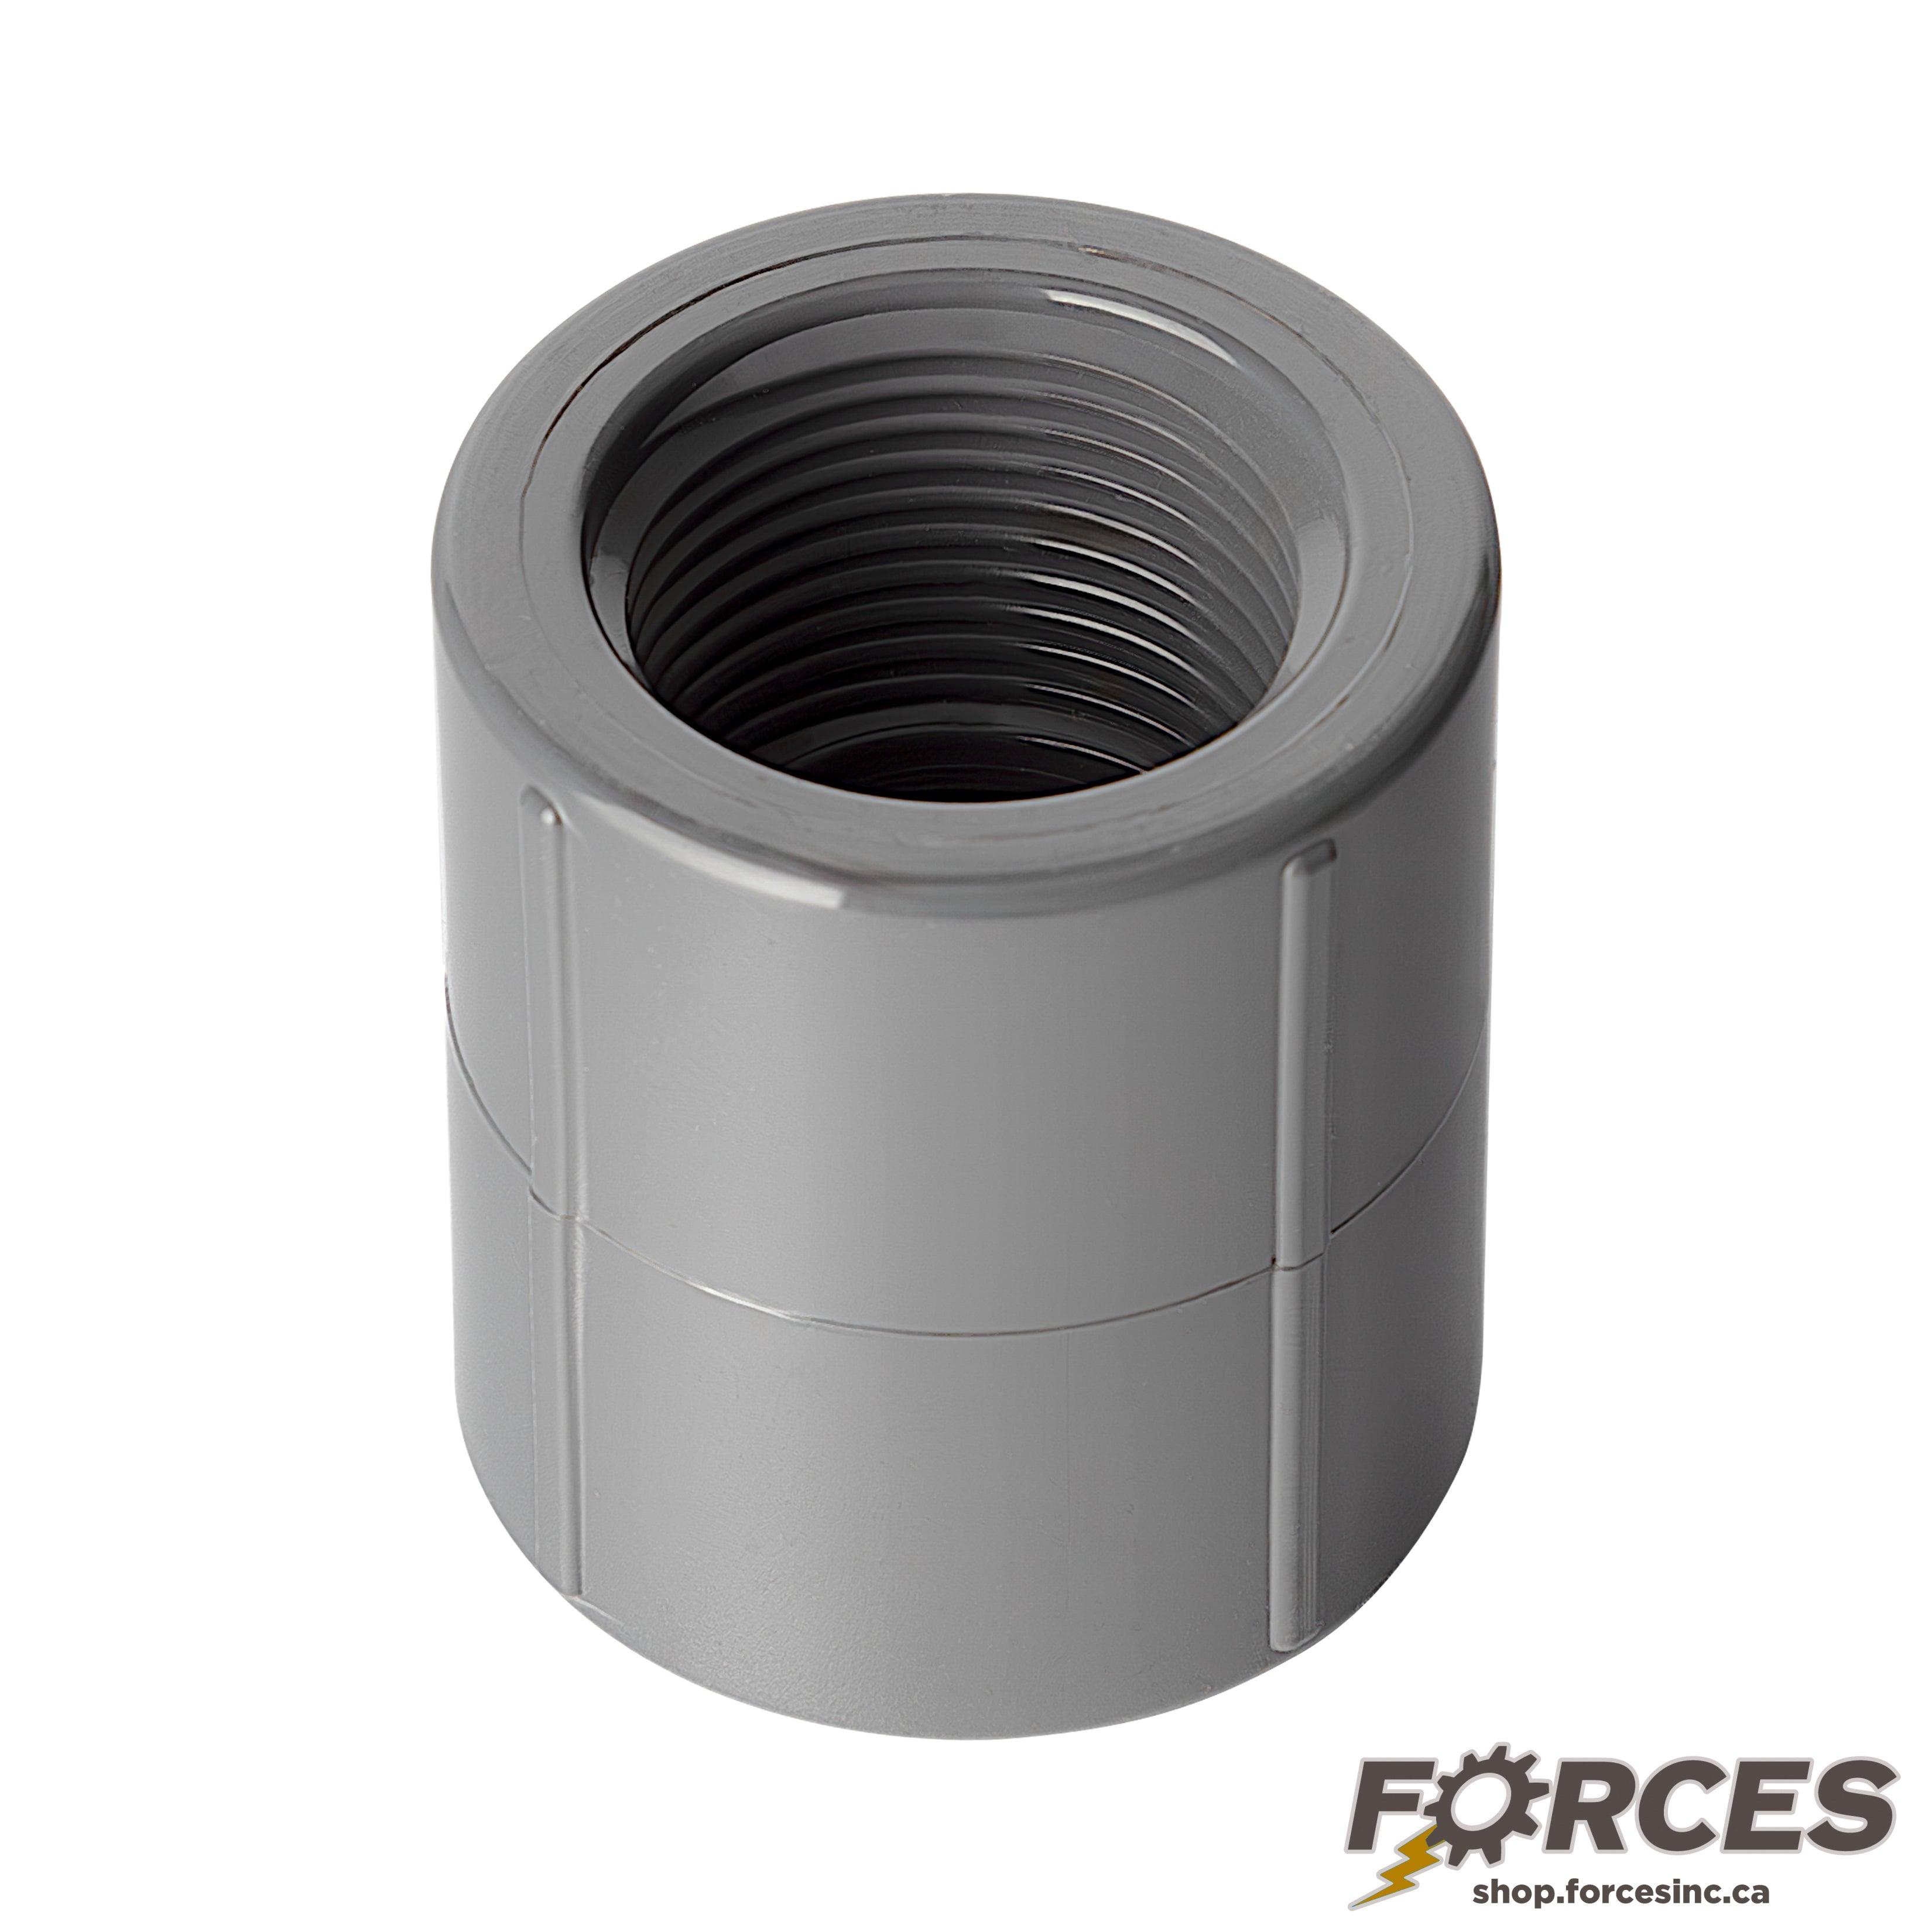 3/8" Coupling (Threaded) Sch 80 - PVC Grey | 830003 - Forces Inc